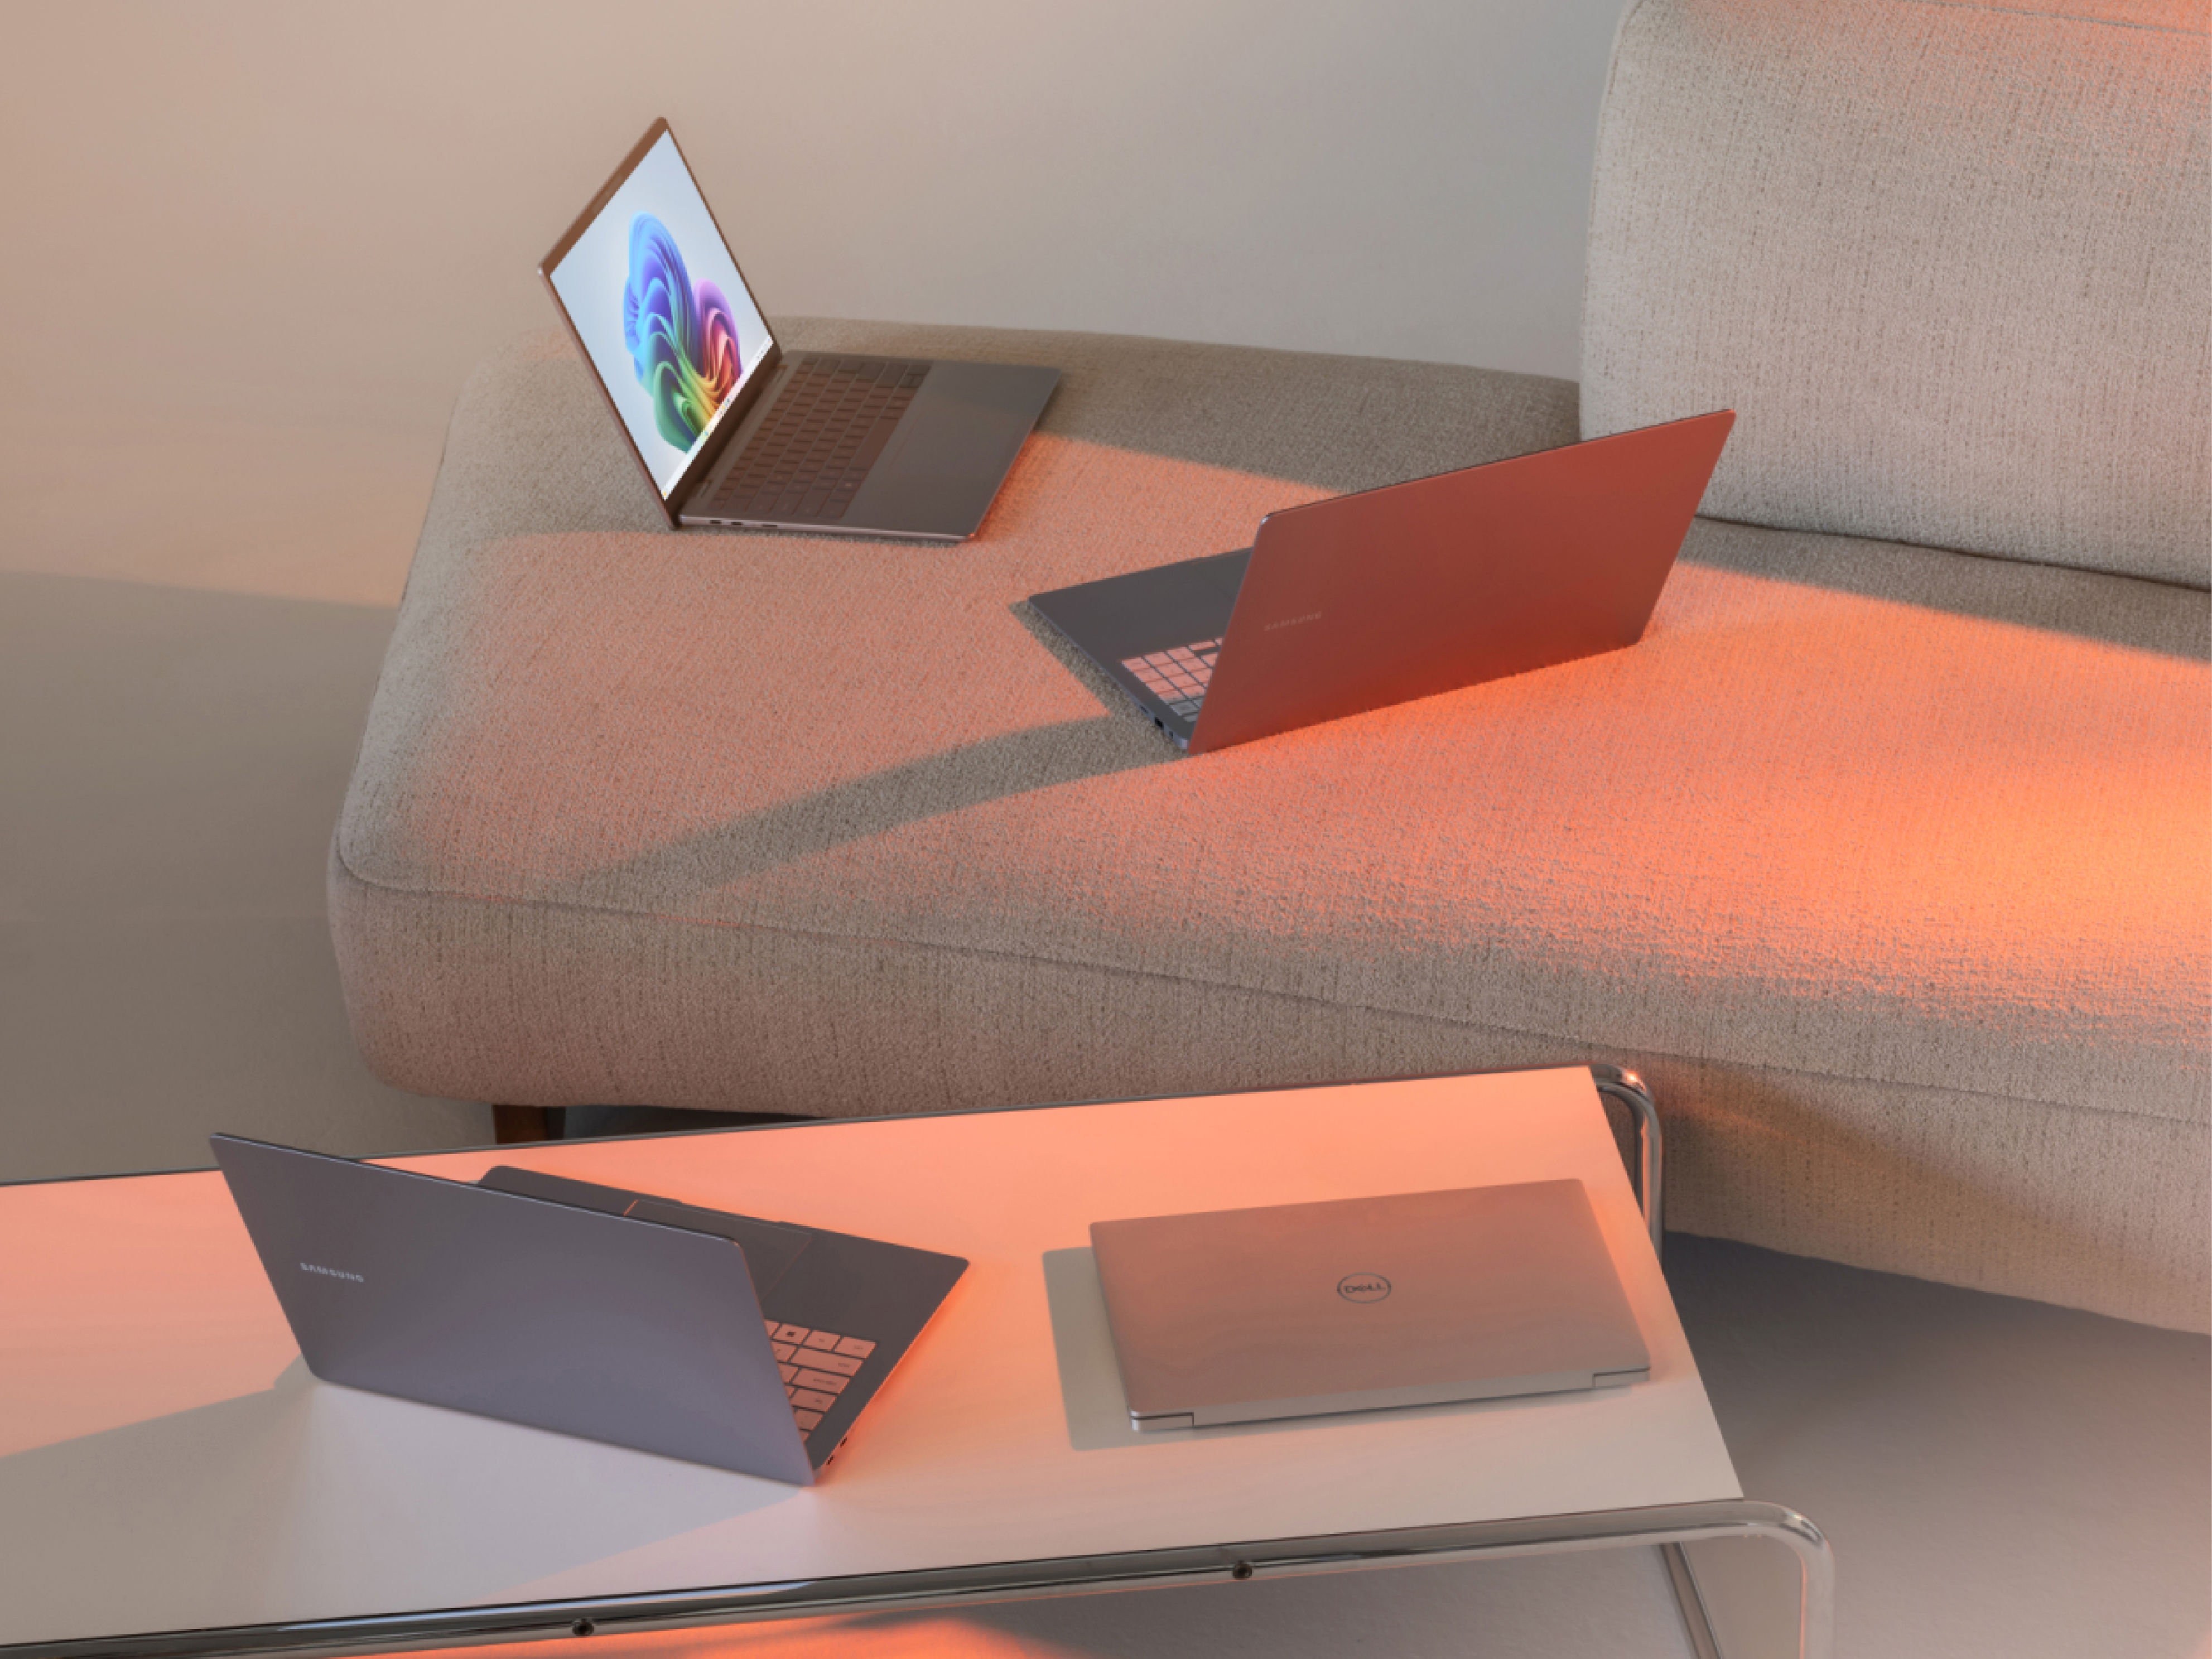 Multiple laptops sitting on a coffee table and couch